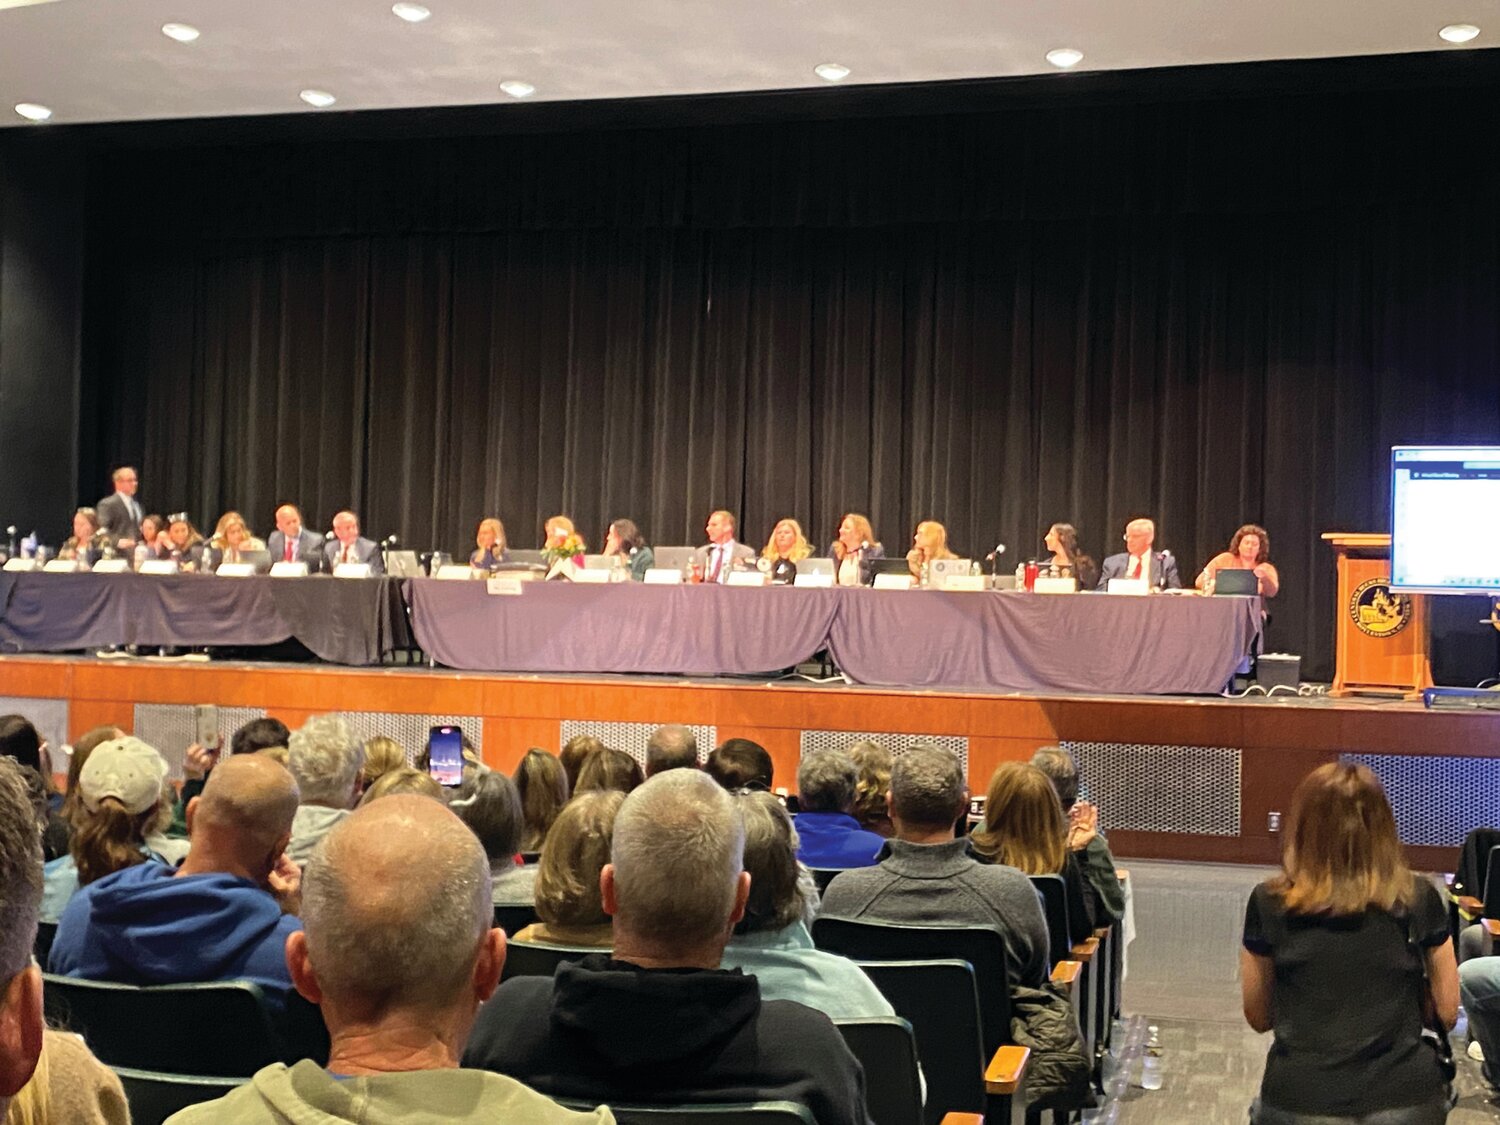 Hundreds attended the meeting of the Central Bucks School Board Tuesday, where a Republican majority approved a $700,000-severance package for the district’s superintendent who abruptly announced his resignation Monday.